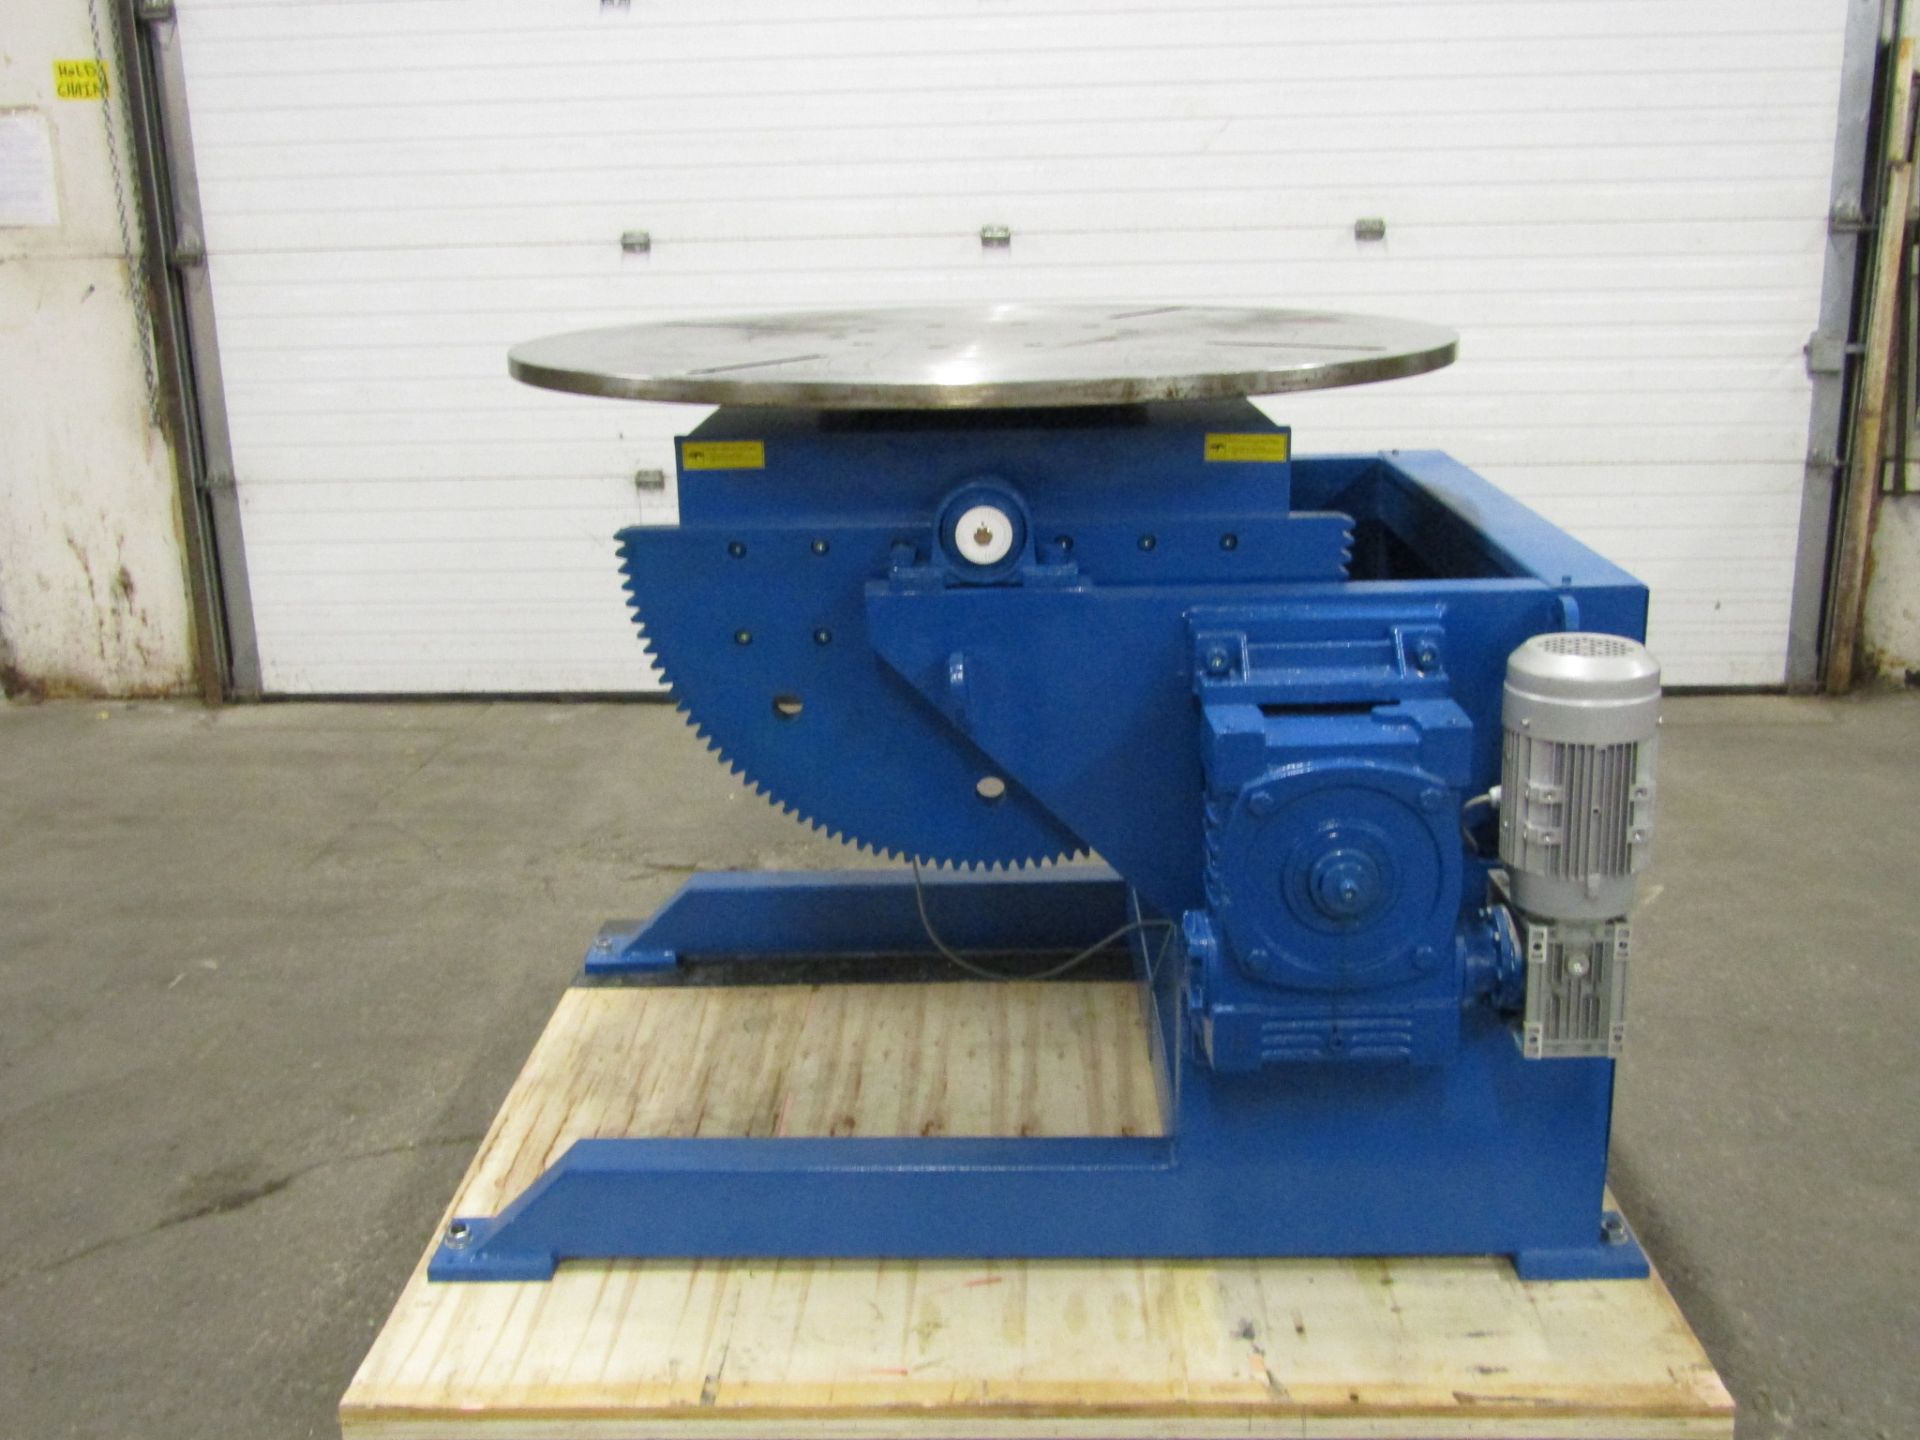 Verner model VD-3000 WELDING POSITIONER 3000lbs capacity - tilt and rotate with variable speed drive